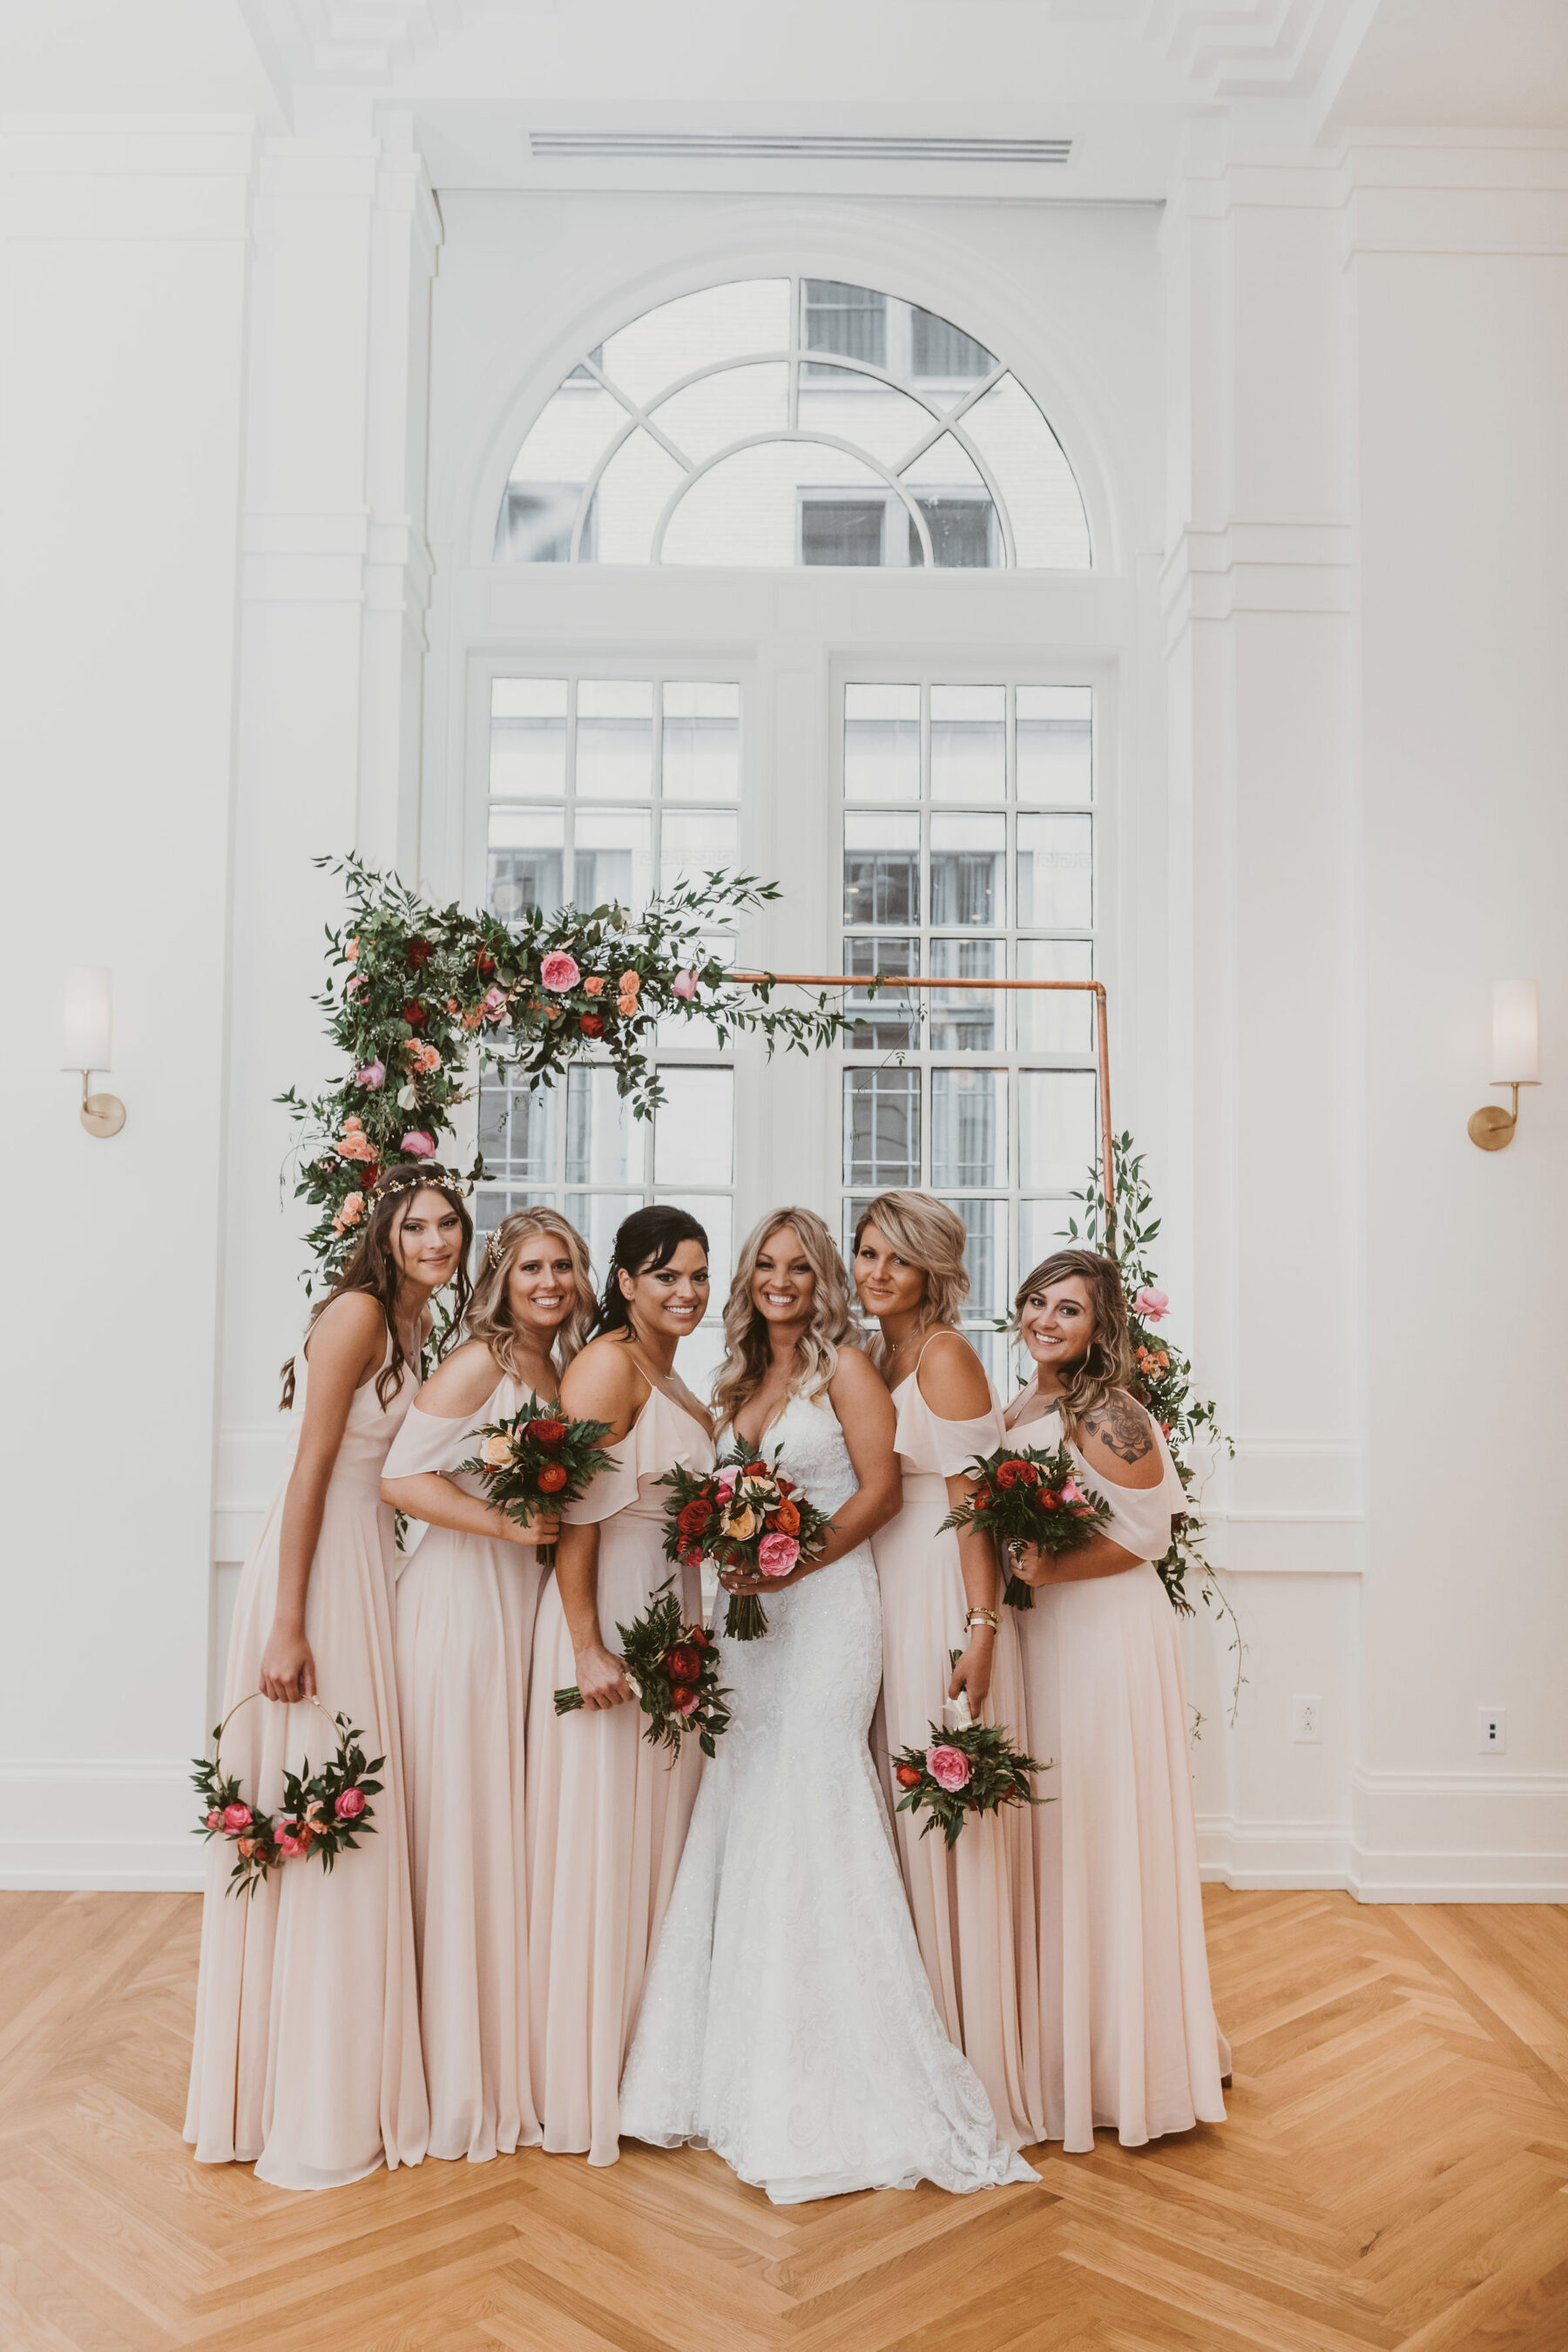 Blush pink bridesmaids dresses: Summer Tennessee Wedding at Noelle from Jayde J. Smith Events featured on Nashville Bride Guide